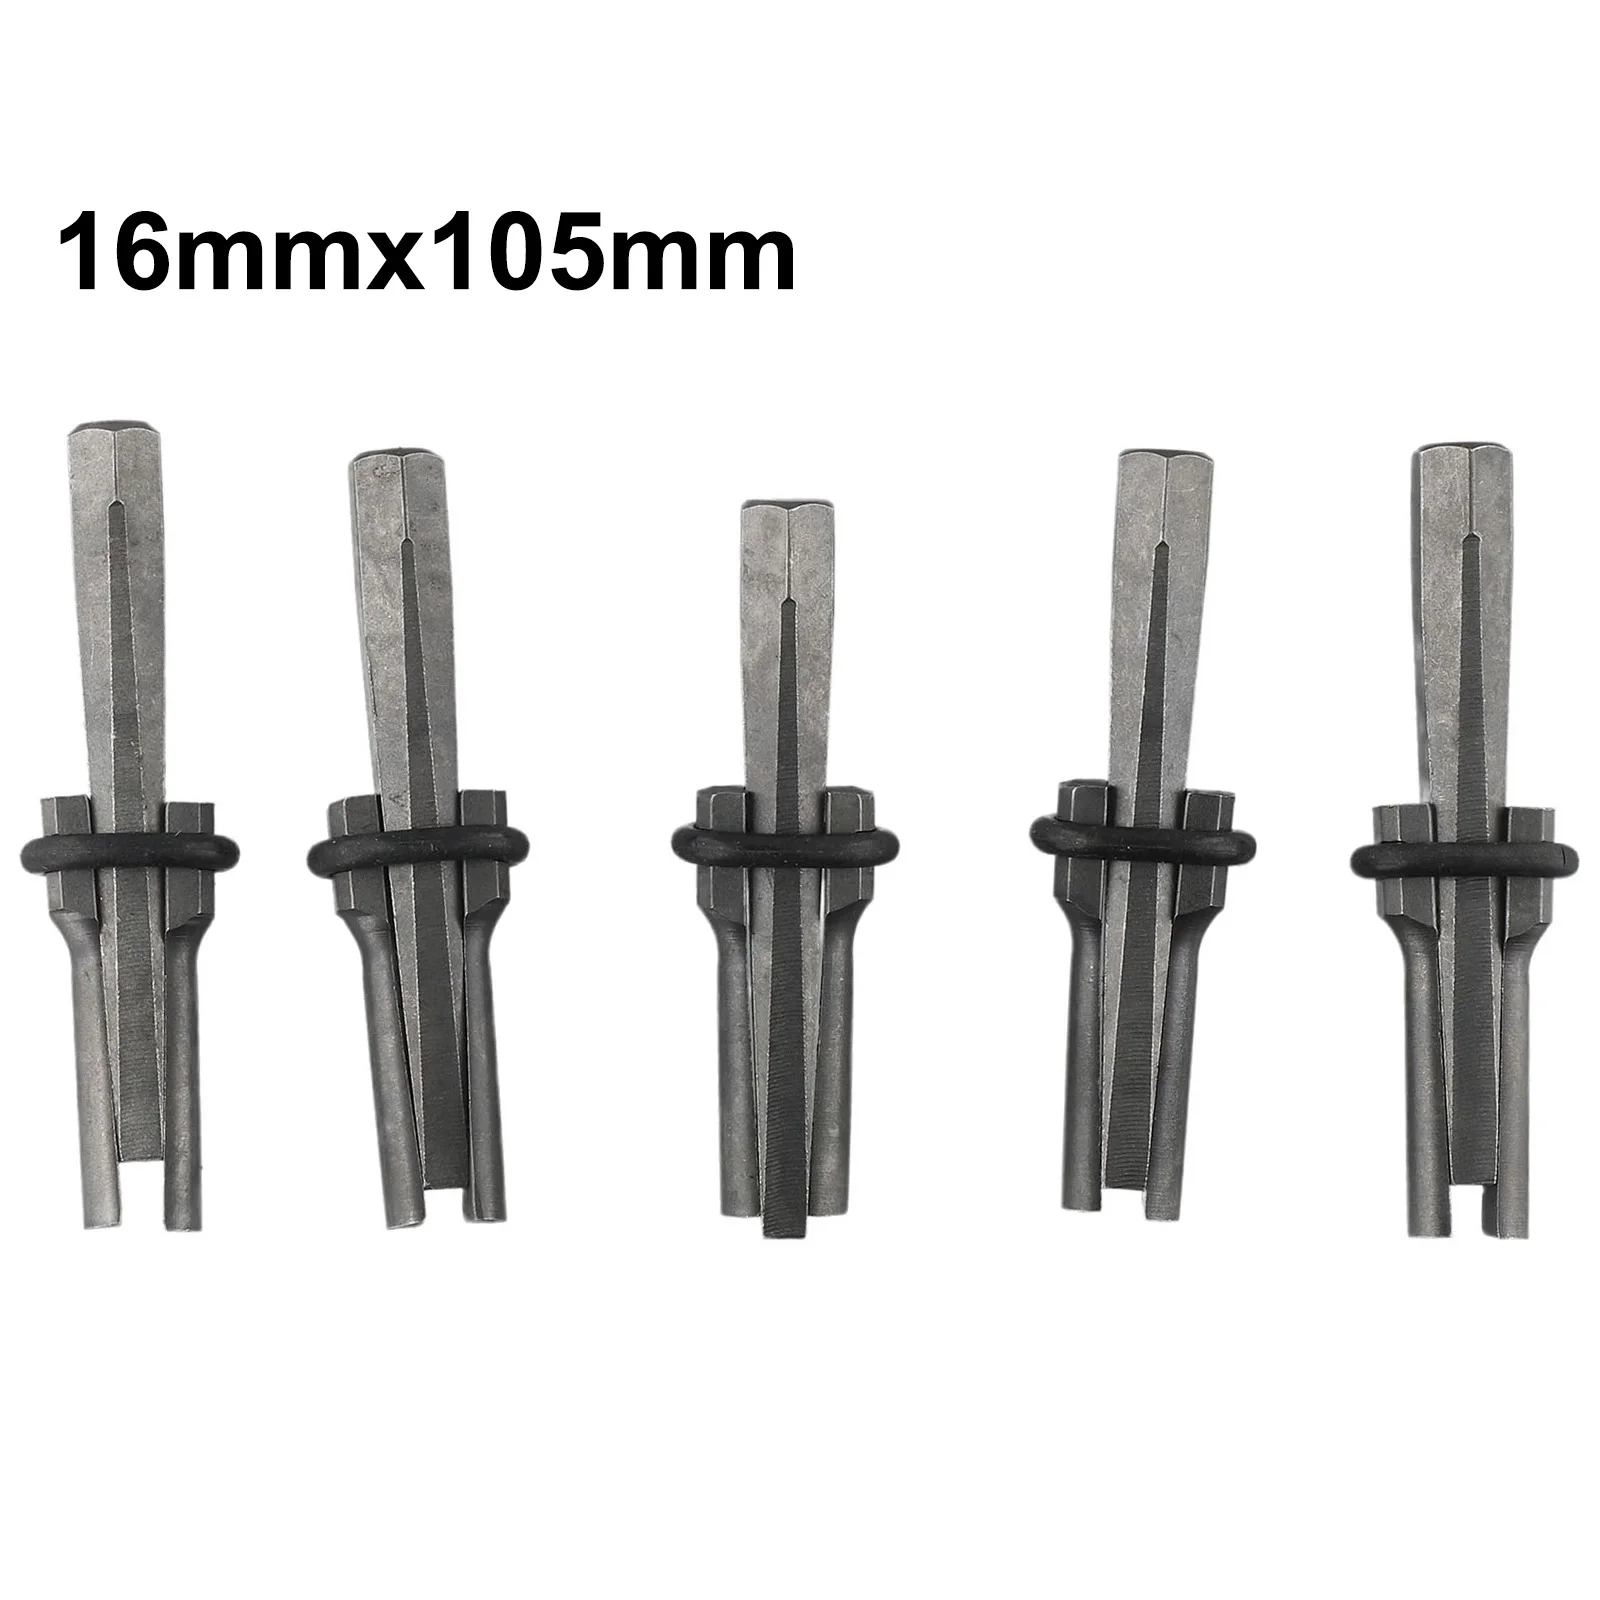 5 Set 5/8 Inch Stone Splitting Tool Stone Splitter Metal Plug Wedges And Feathers Shims Concrete Rock Splitters Hand Tool 105mm original electric tool accessory drill set electrodrill metal drill bits wood drill bits stone drill bits concrete drill bits